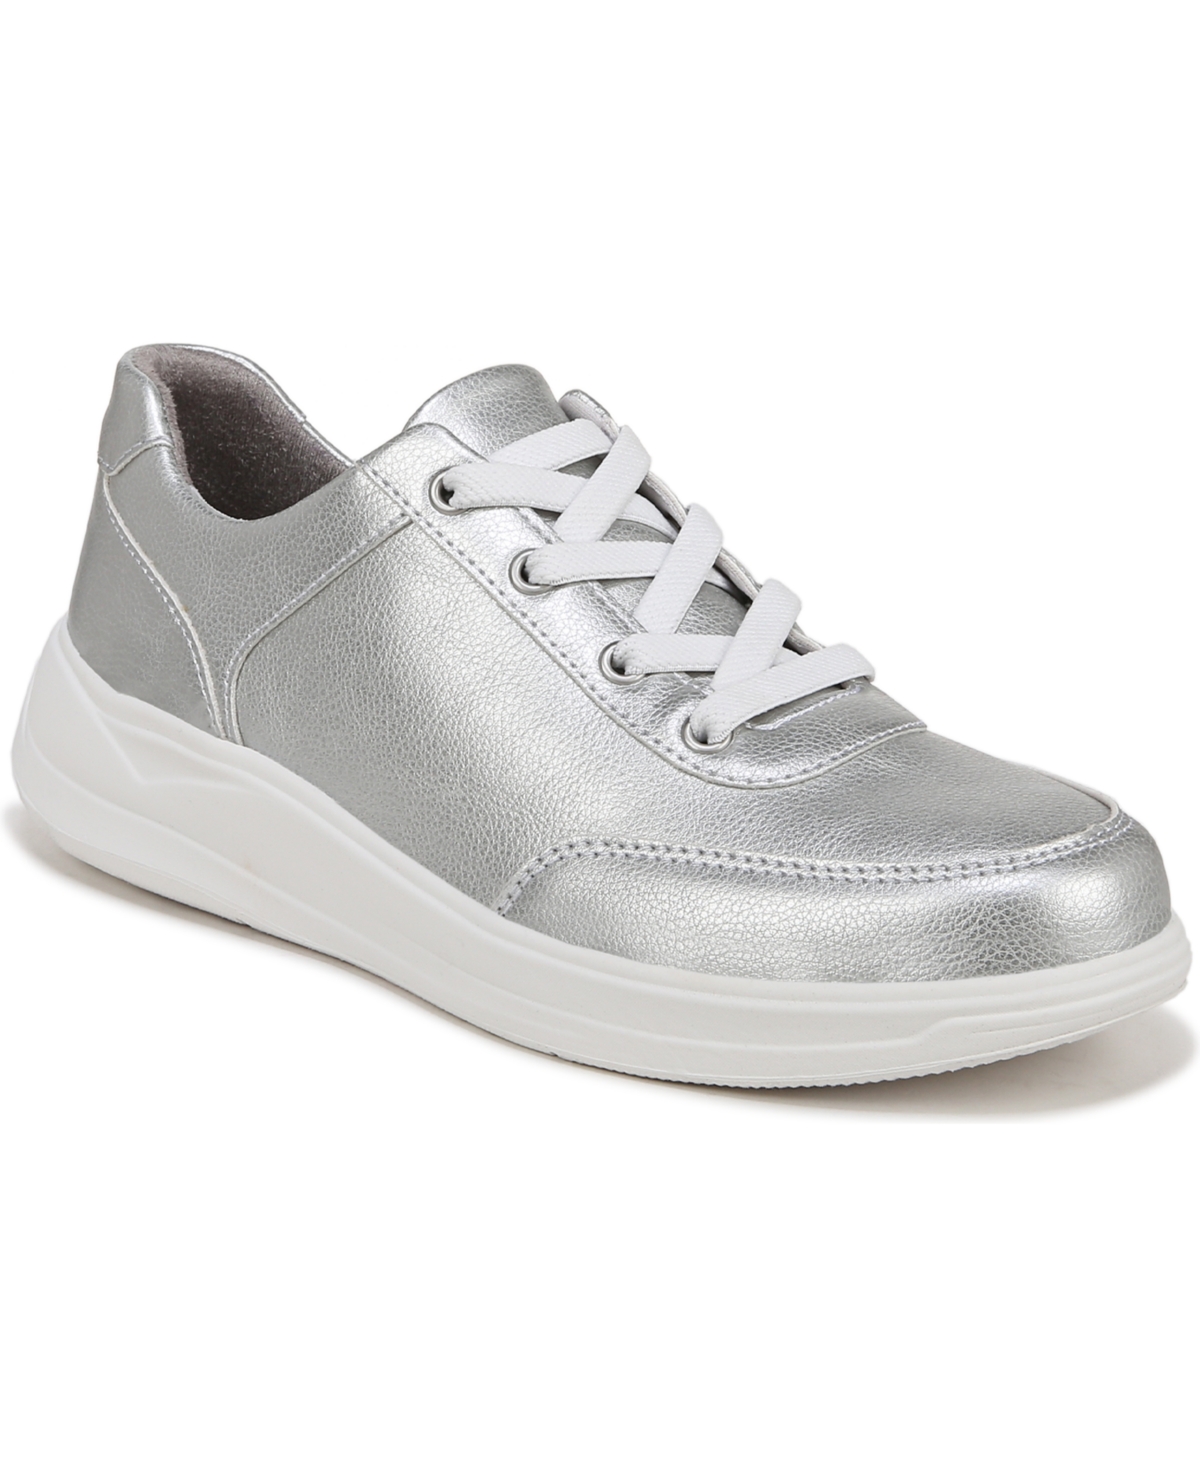 Times Square Washable Slip-on Sneakers - Silver Faux Leather